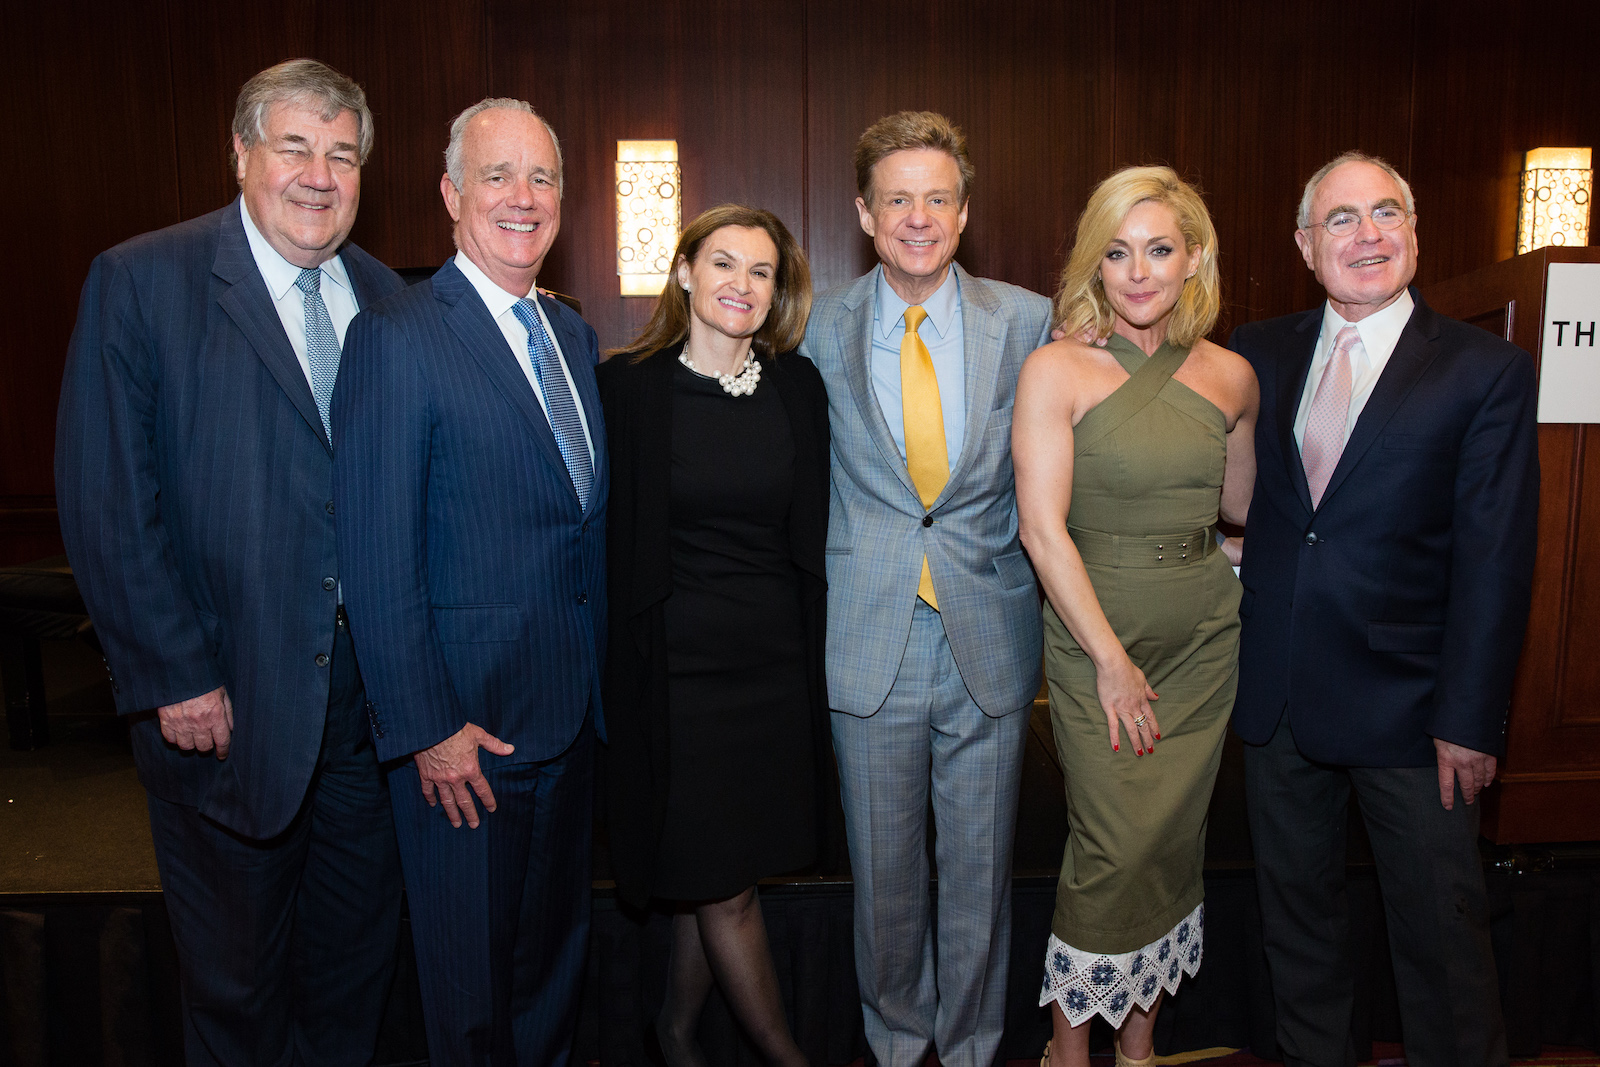 The Broadway Association 2016 Annual Awards Luncheon